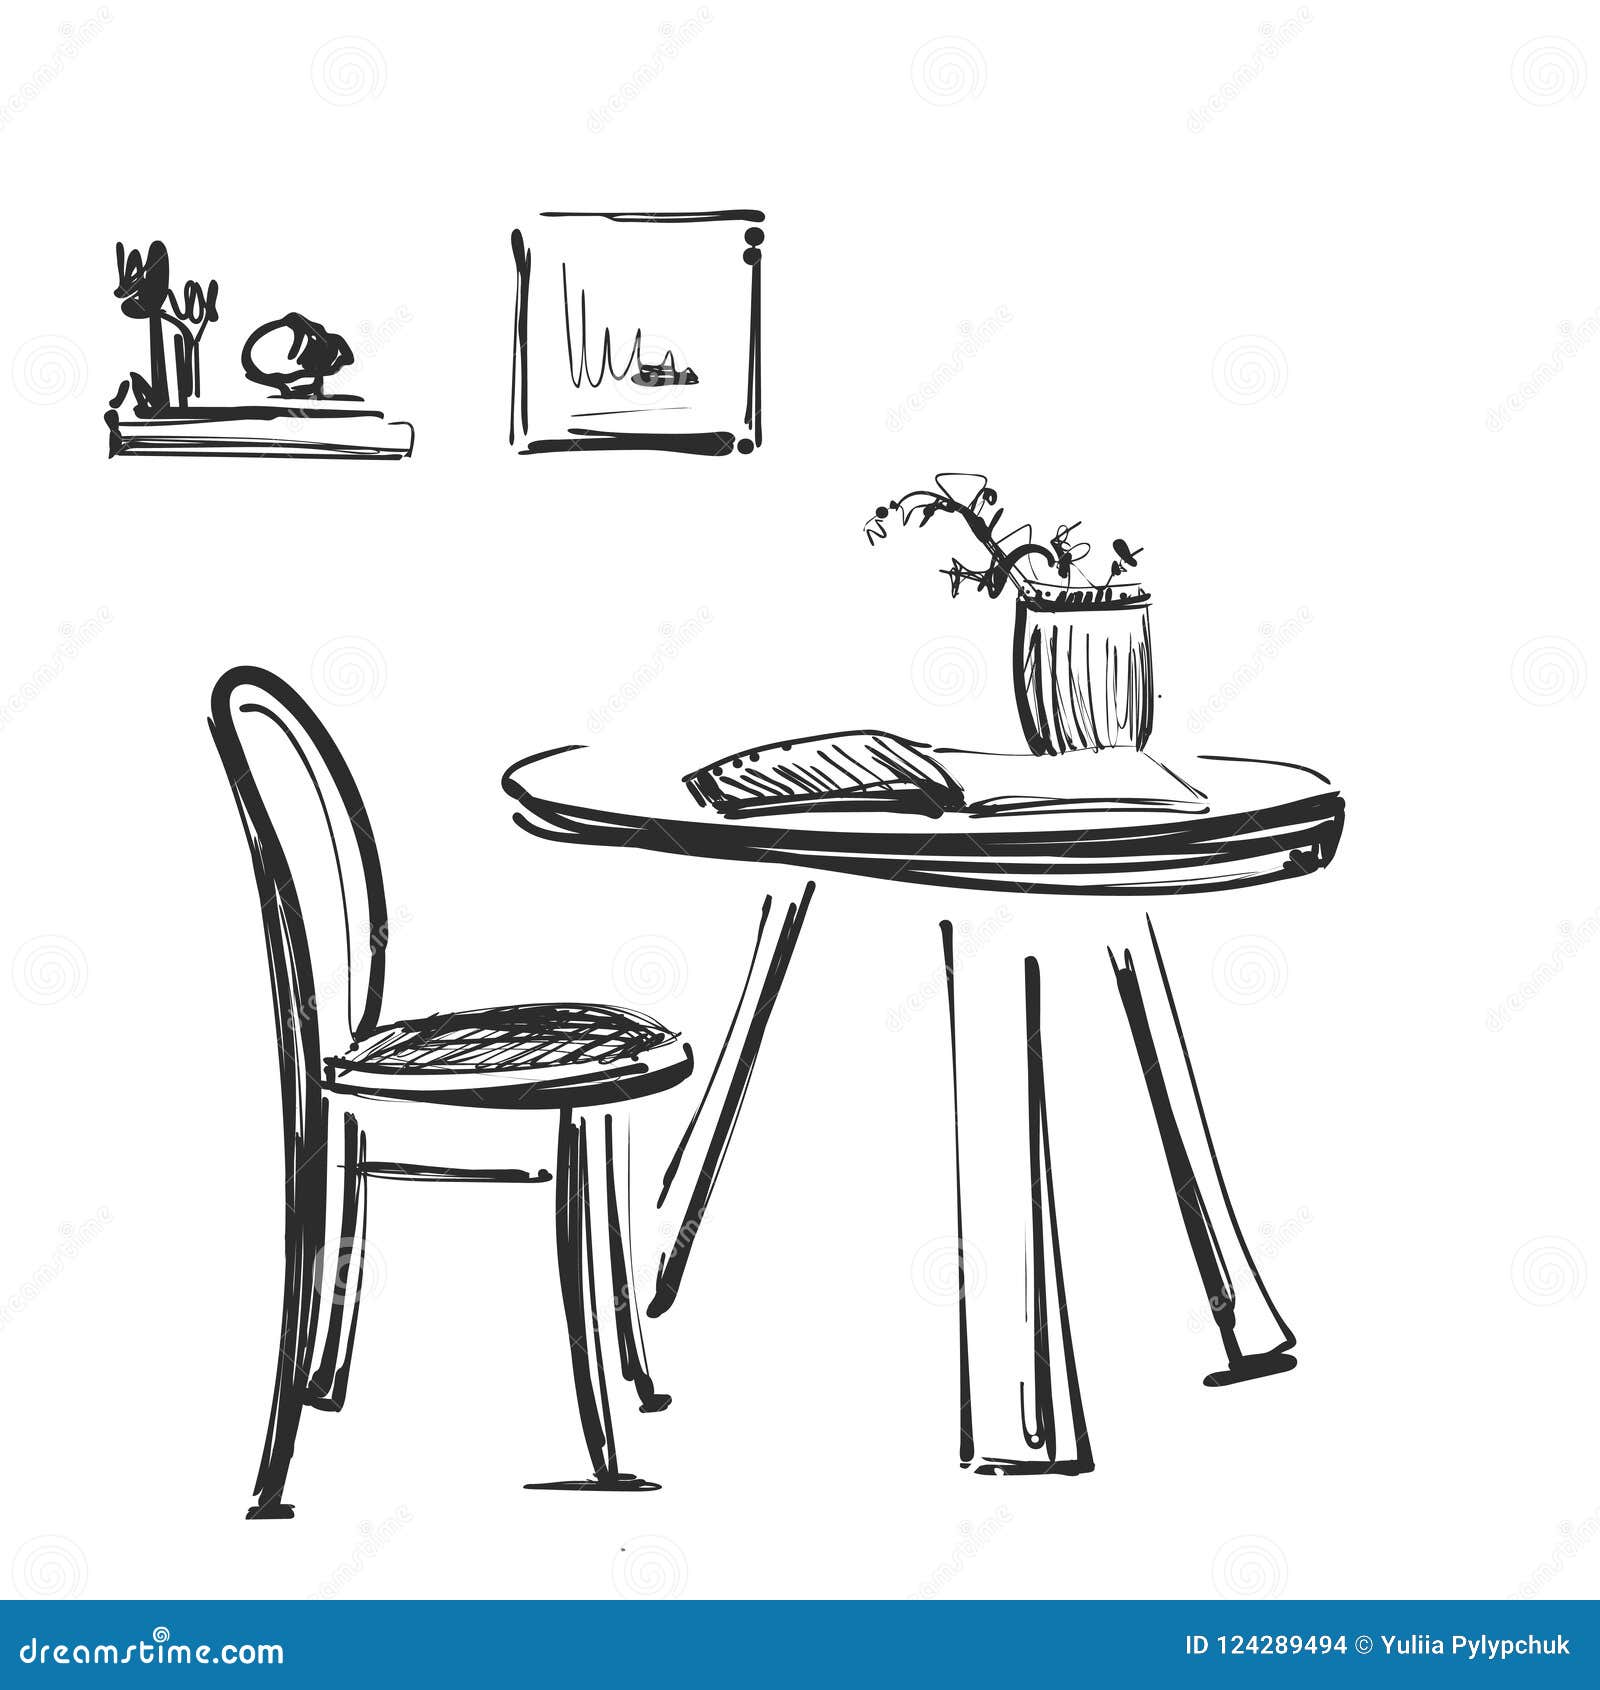 Table & chair- one point perspective | Perspective drawing, Perspective  drawing lessons, Perspective lessons